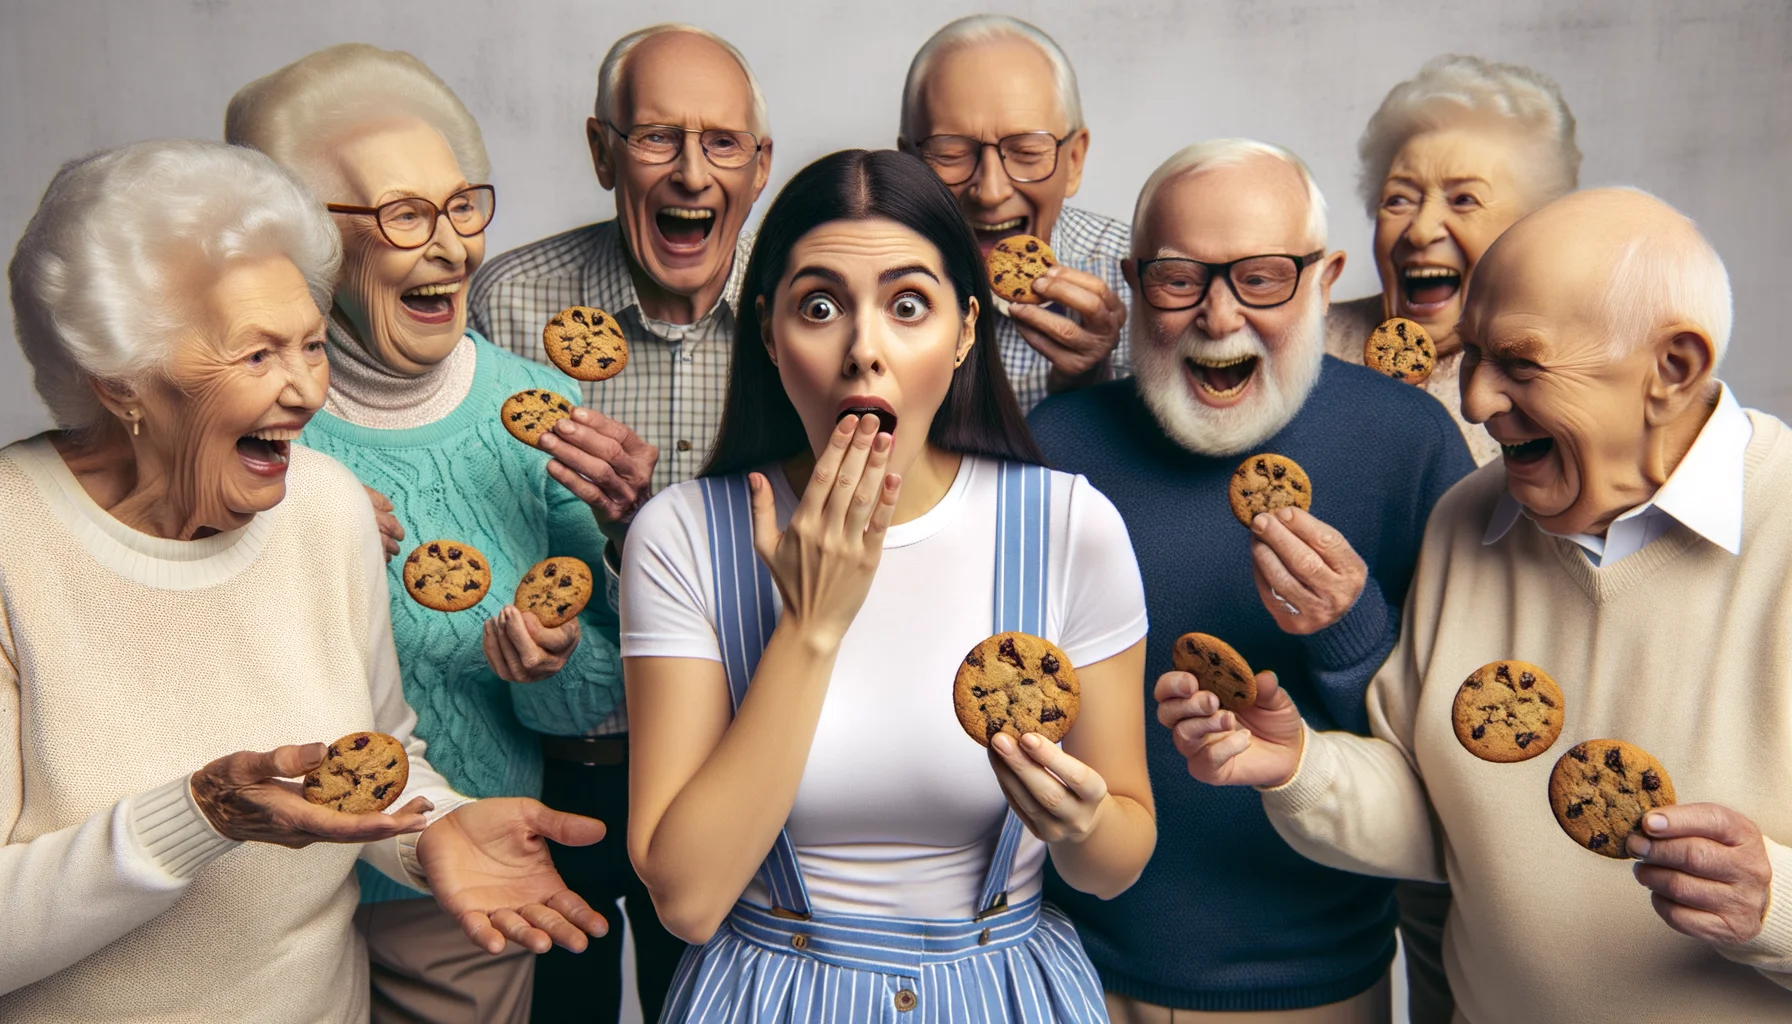 Create a comedic image set in a realistic scenario related to old people and diets. Picture a young adult woman with average build and brunette hair, who gets caught sneaking cookies into a diet class attended primarily by seniors. The shock on her face and the seniors' laughter make a hilarious picture. Some of the seniors are brushing off the cookie crumbs from their diets while others are trying to grab a cookie out of humor.